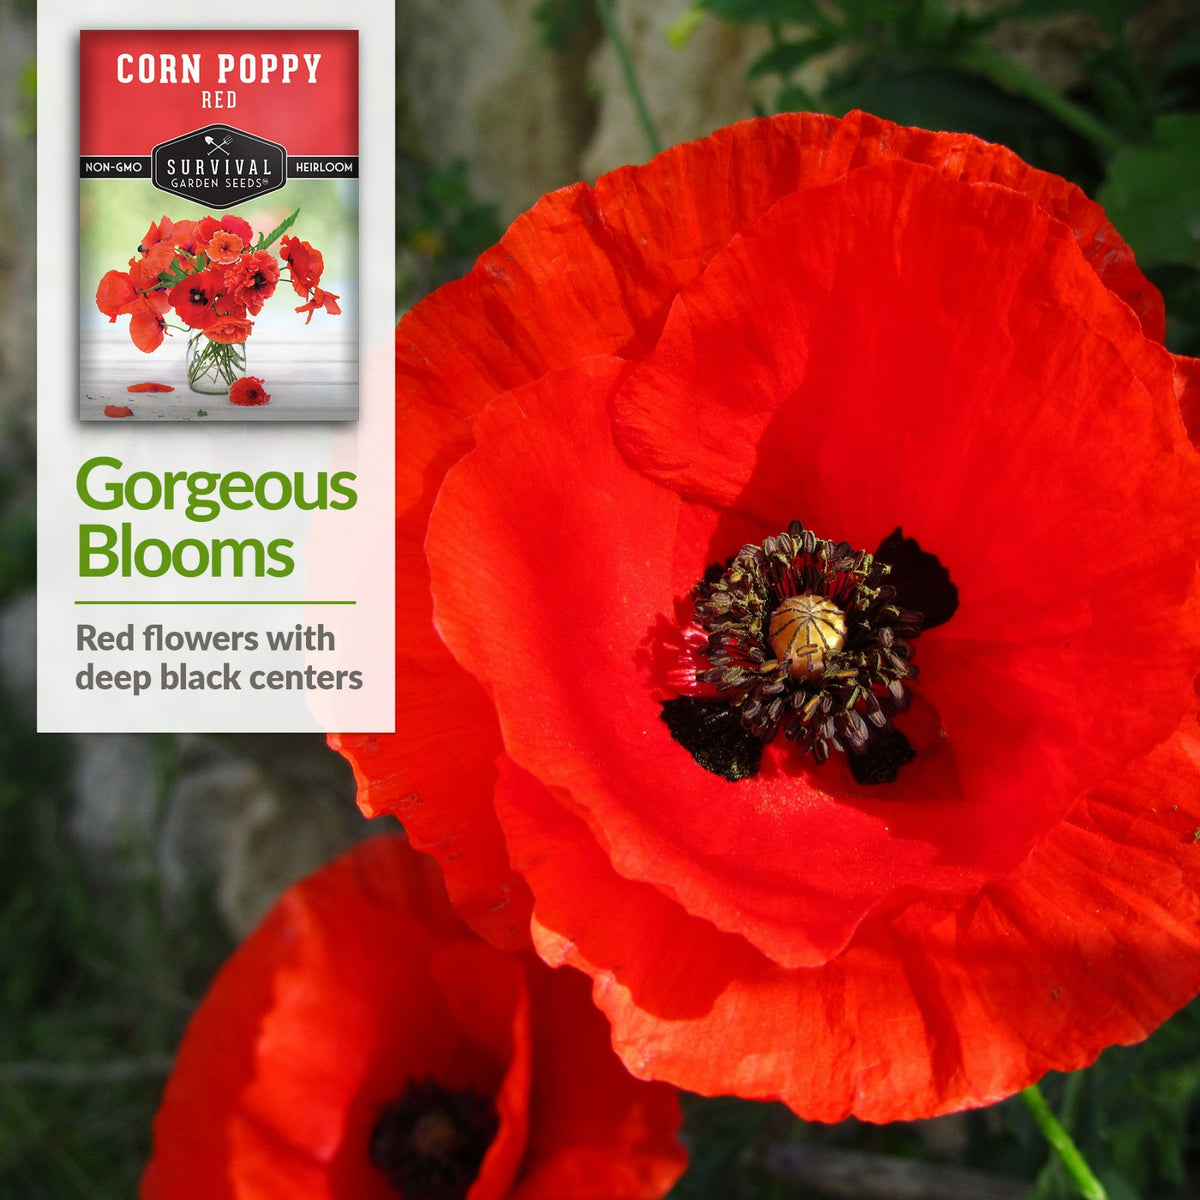 corn poppies have red flowers with deep black centers